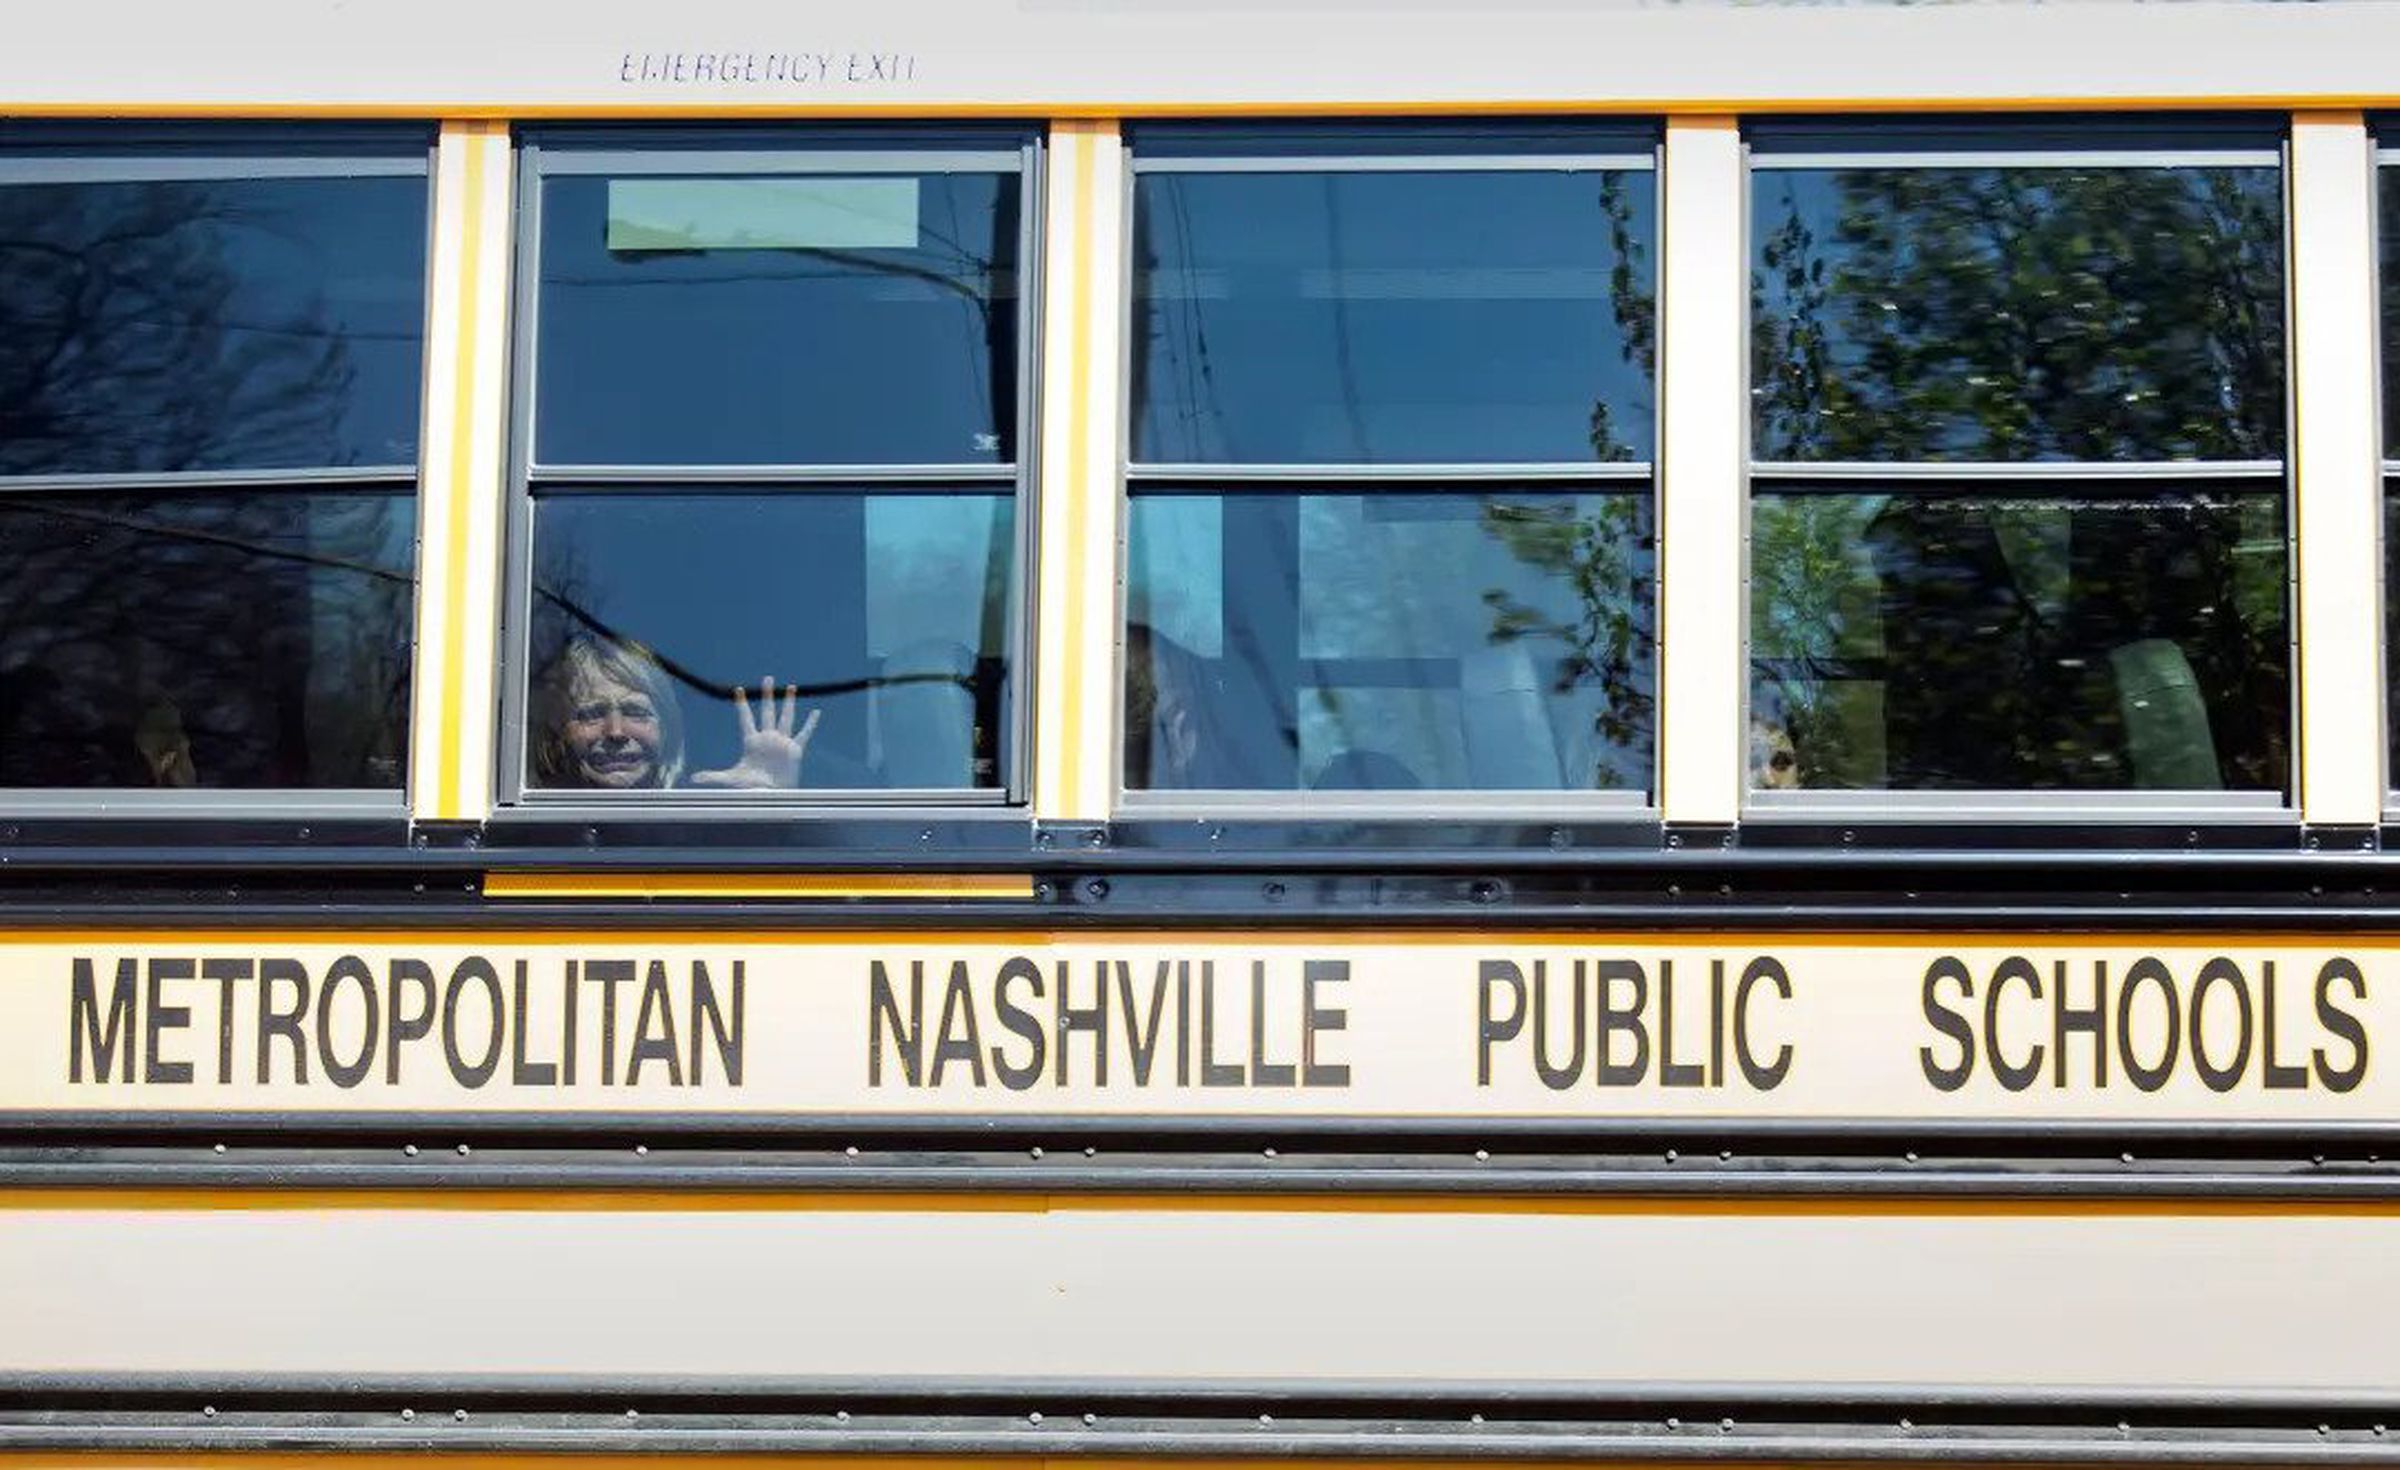 A schoolbus with a crying child placing their hand against the window.